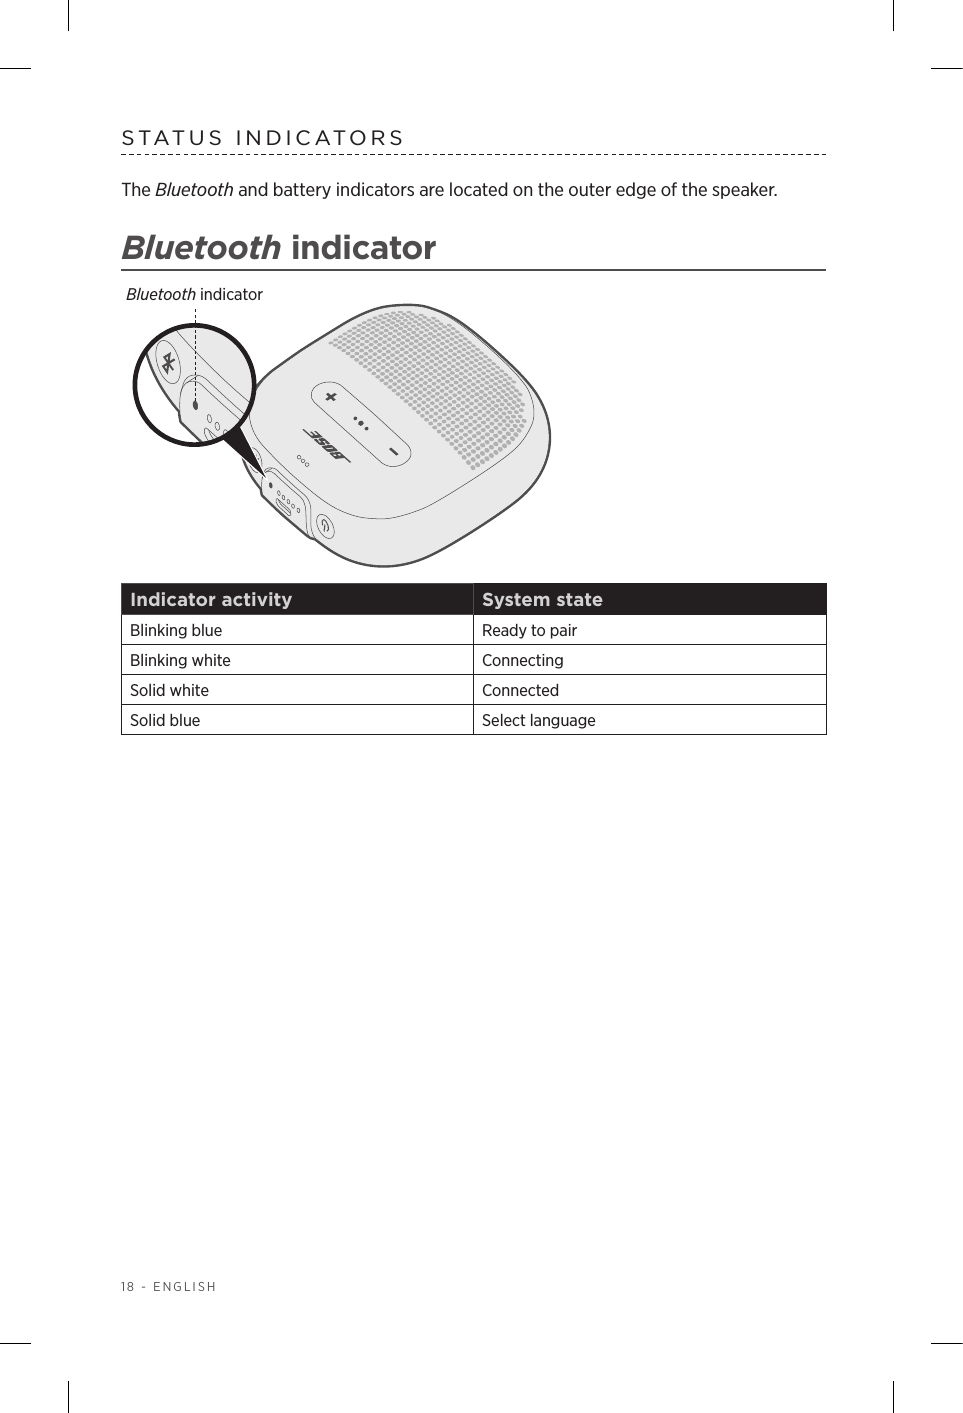 18 - ENGLISHSTATUS INDICATORSThe Bluetooth and battery indicators are located on the outer edge of the speaker.Bluetooth indicatorBluetooth indicatorIndicator activity System stateBlinking blue Ready to pairBlinking white ConnectingSolid white ConnectedSolid blue Select language